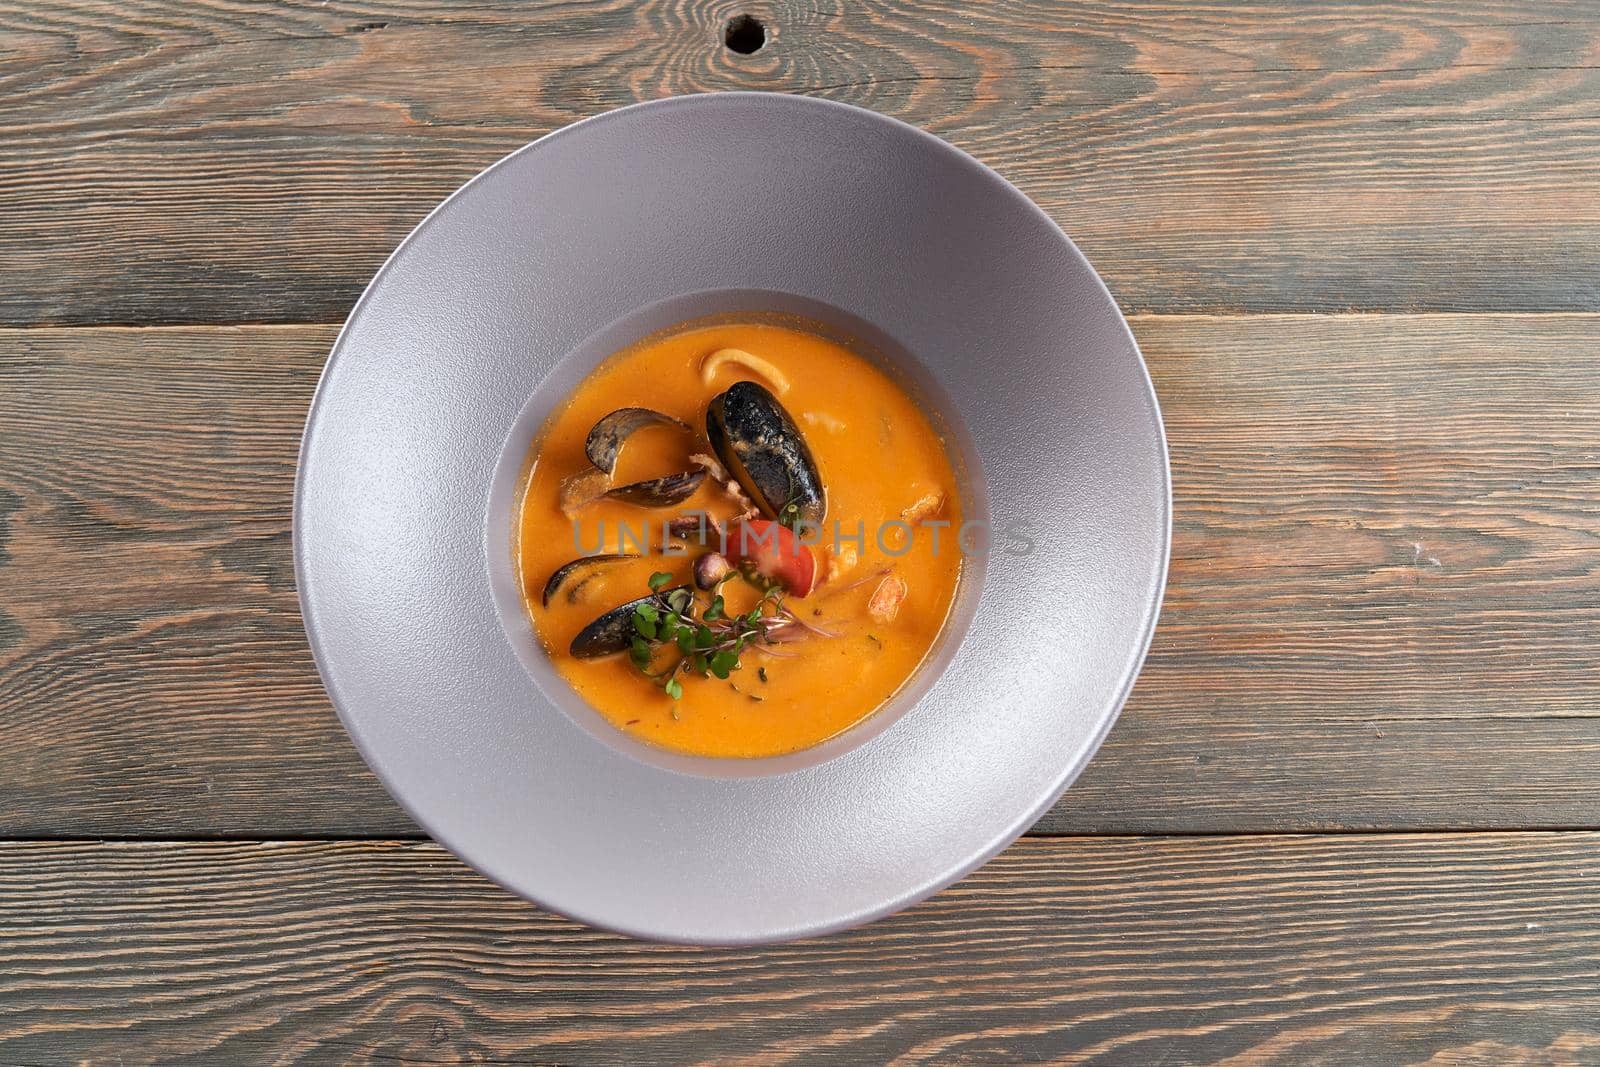 From above view of tasty bright orange soup with mussels in black shells in white plate on wooden restaurant table. Delicious seafood served with sprouts and tomatoes. Concept of exotic asian cuisine.